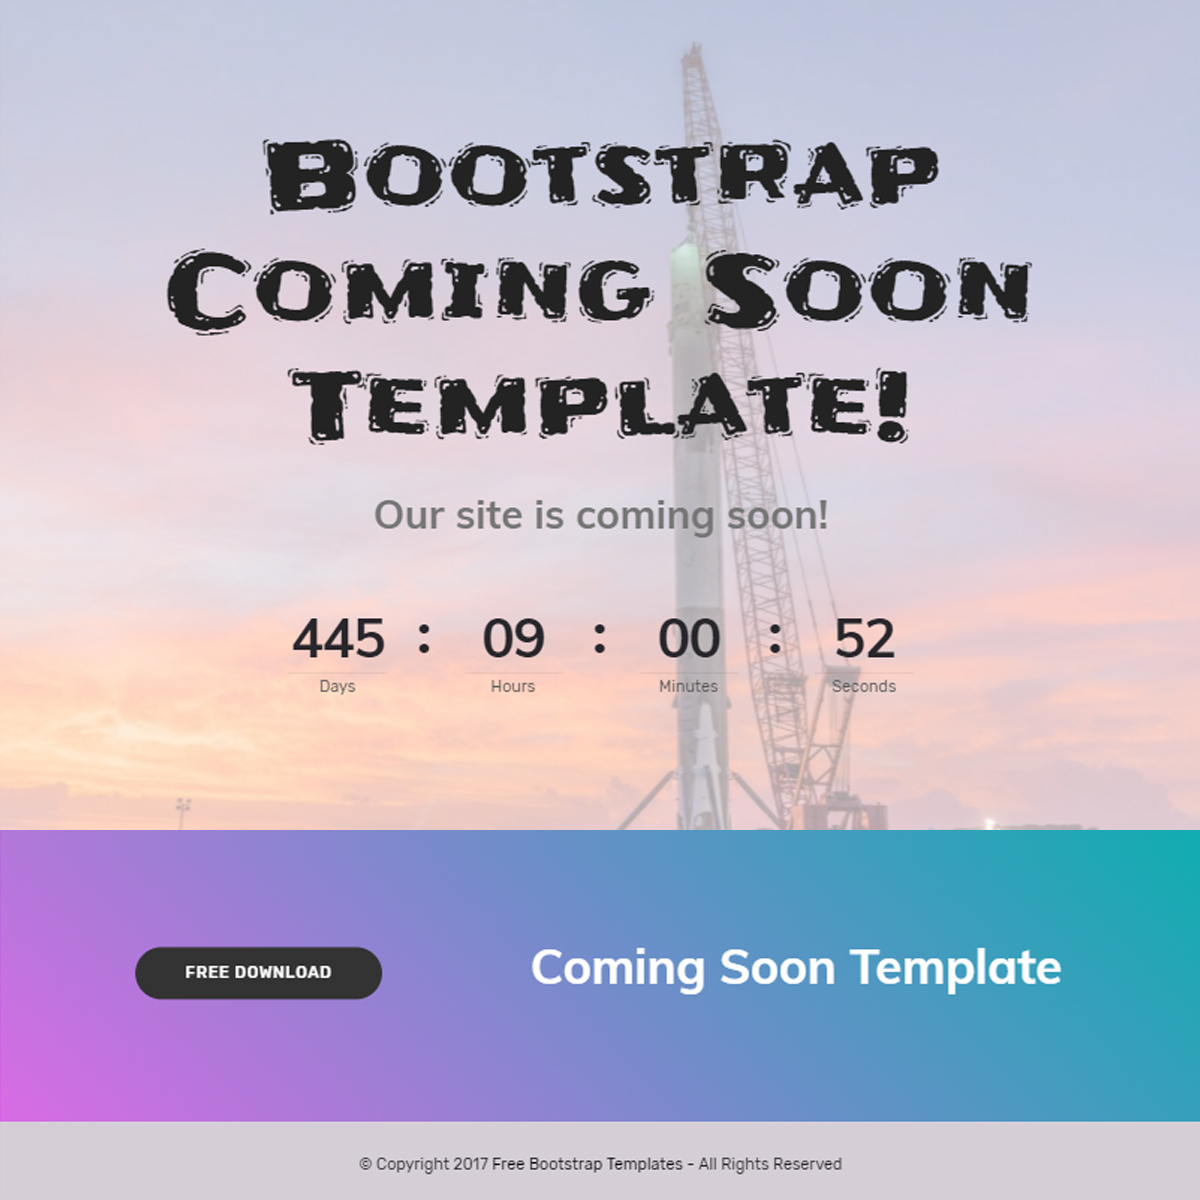 Free Download Bootstrap Coming Soon Templates